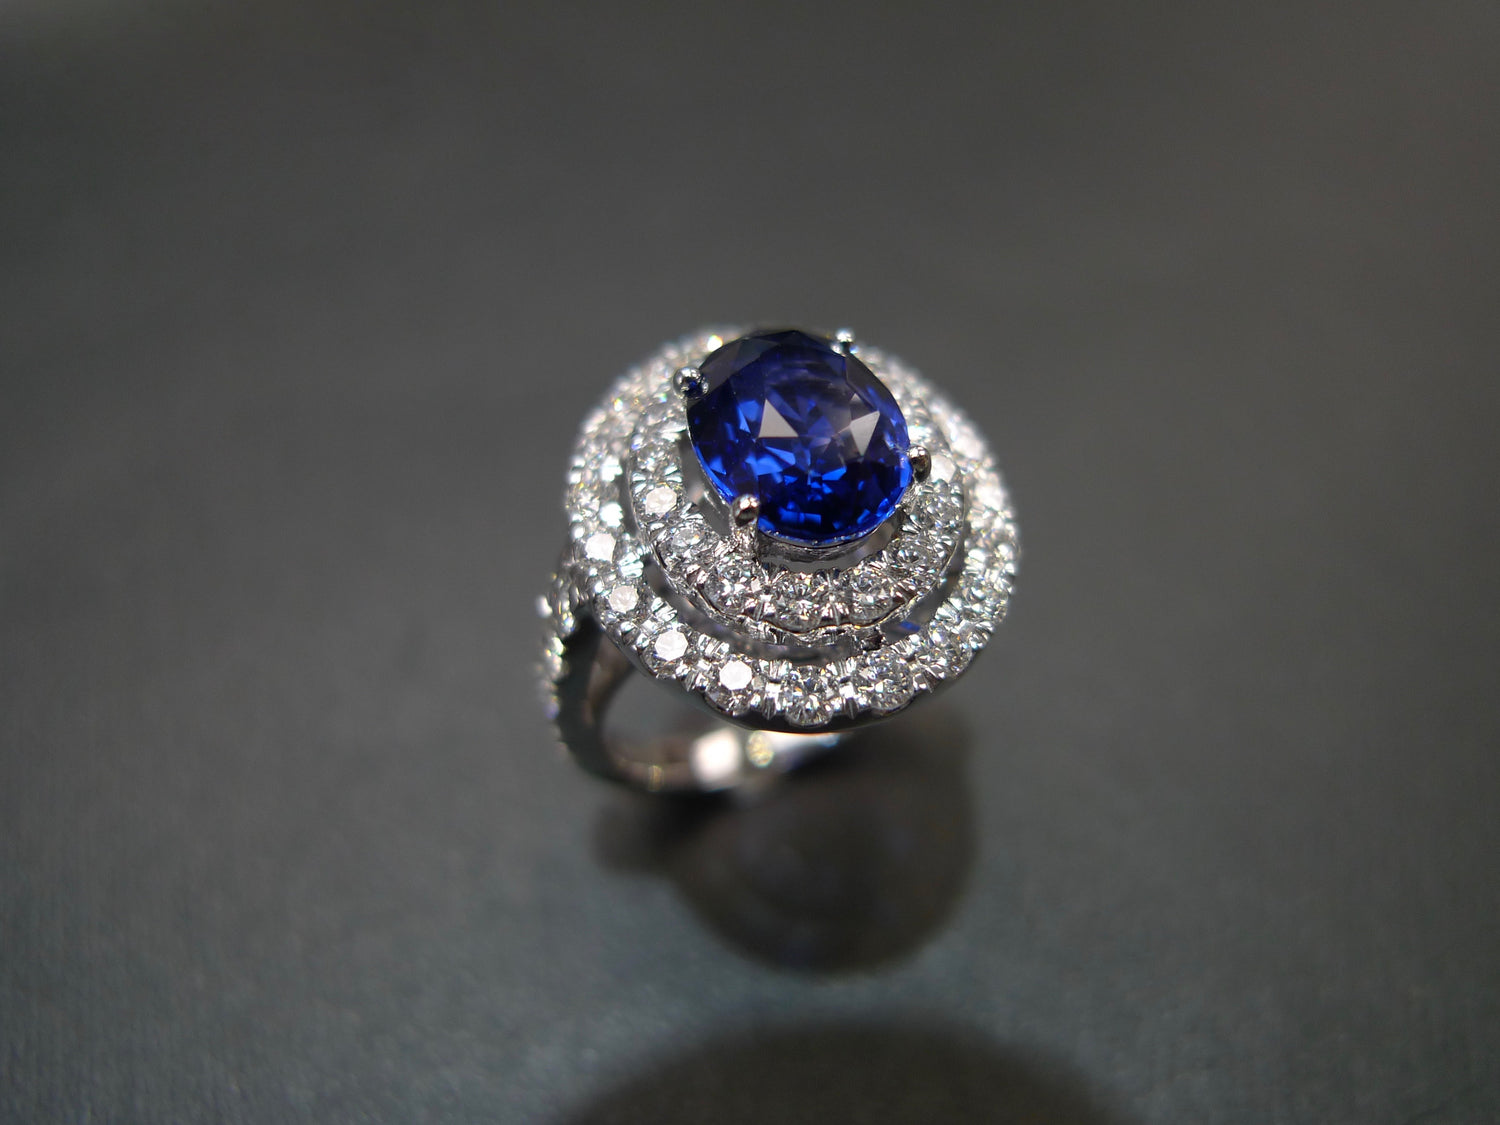 3.04ct Ceylon Blue Sapphire and Diamond Double Halo Ring in 18K White Gold - HN JEWELRY